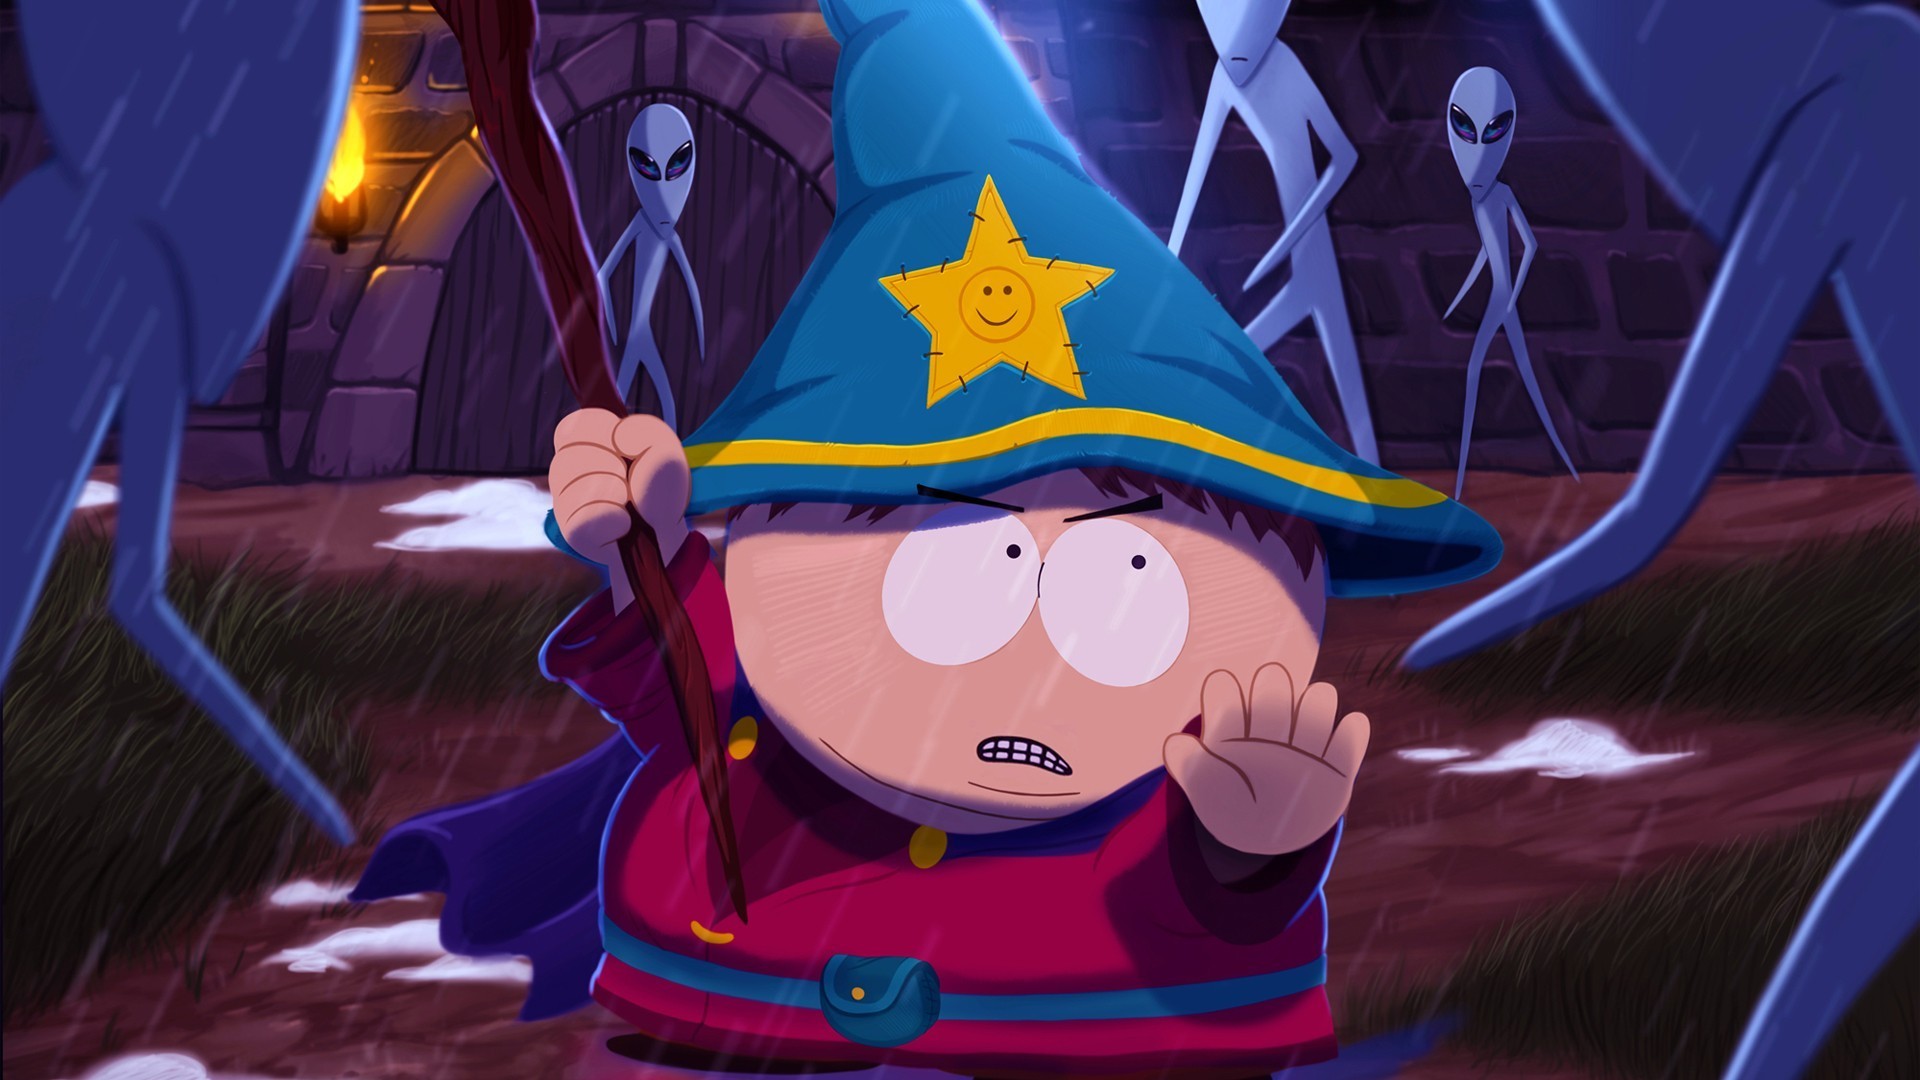 1920x1080 Aliens Eric Cartman South Park The Stick Of Truth Video Games